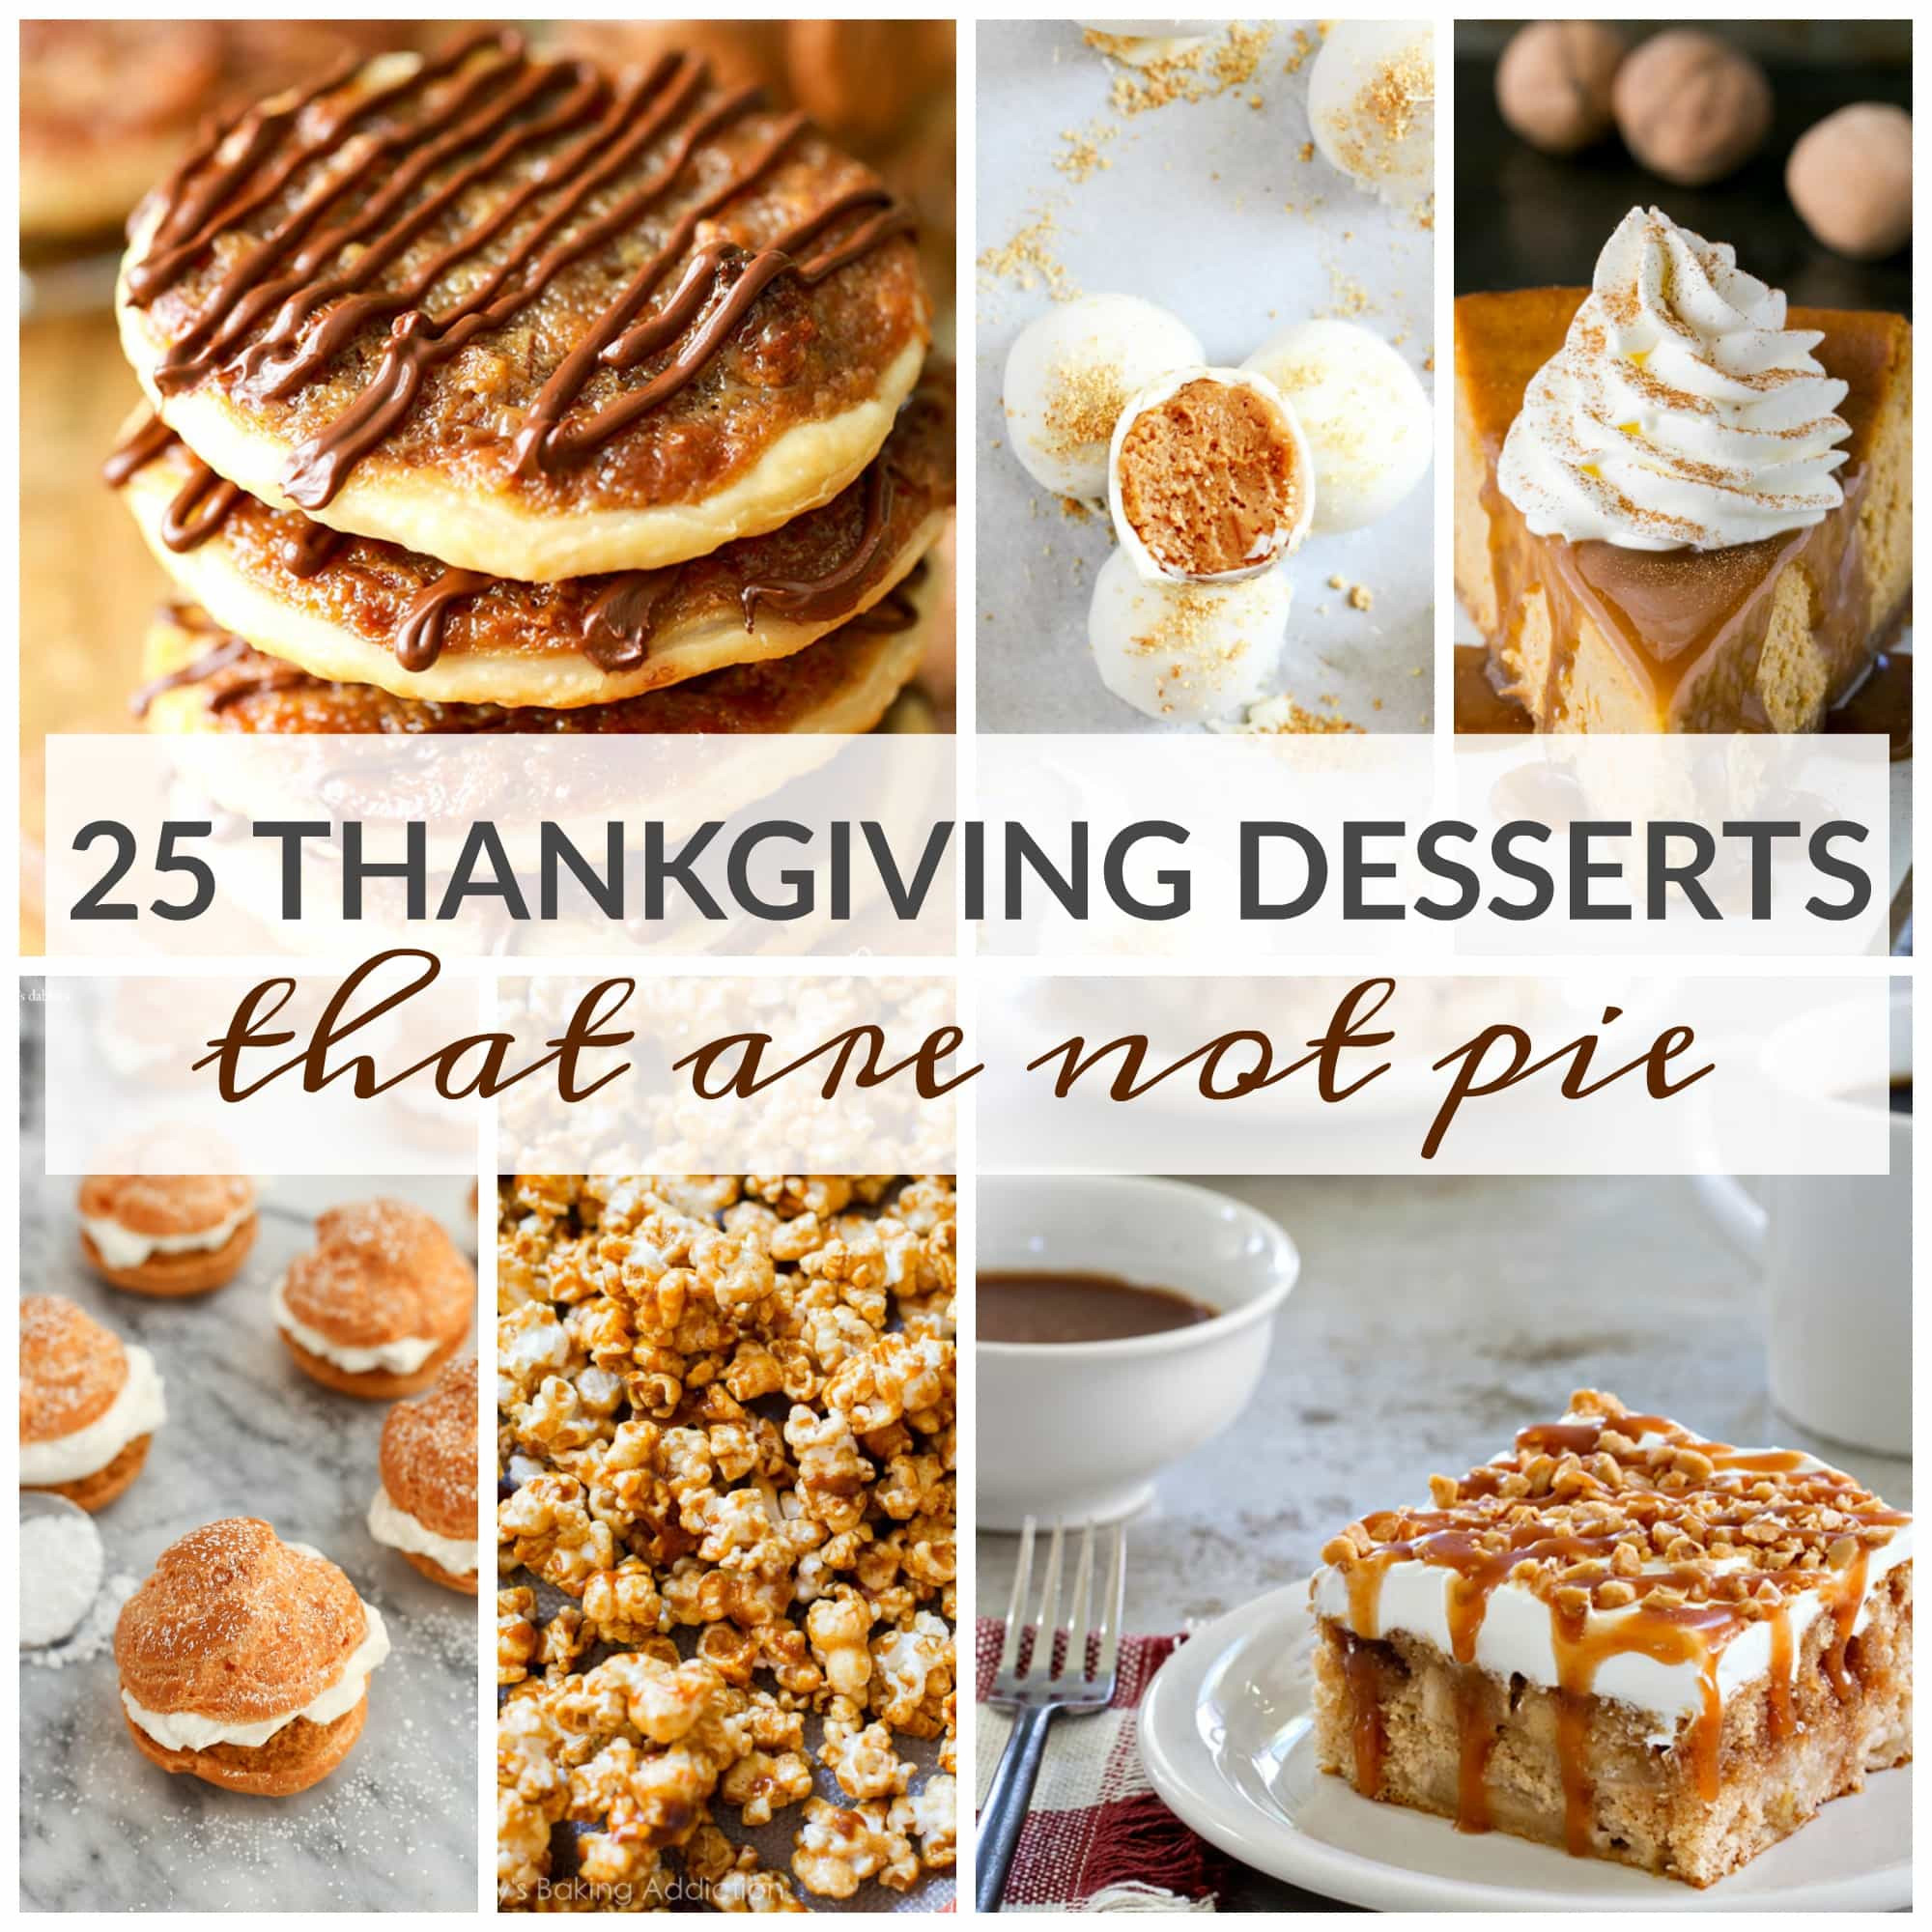 Thanksgiving Pies And Cakes
 25 Thanksgiving Desserts That Are Not Pie A Dash of Sanity